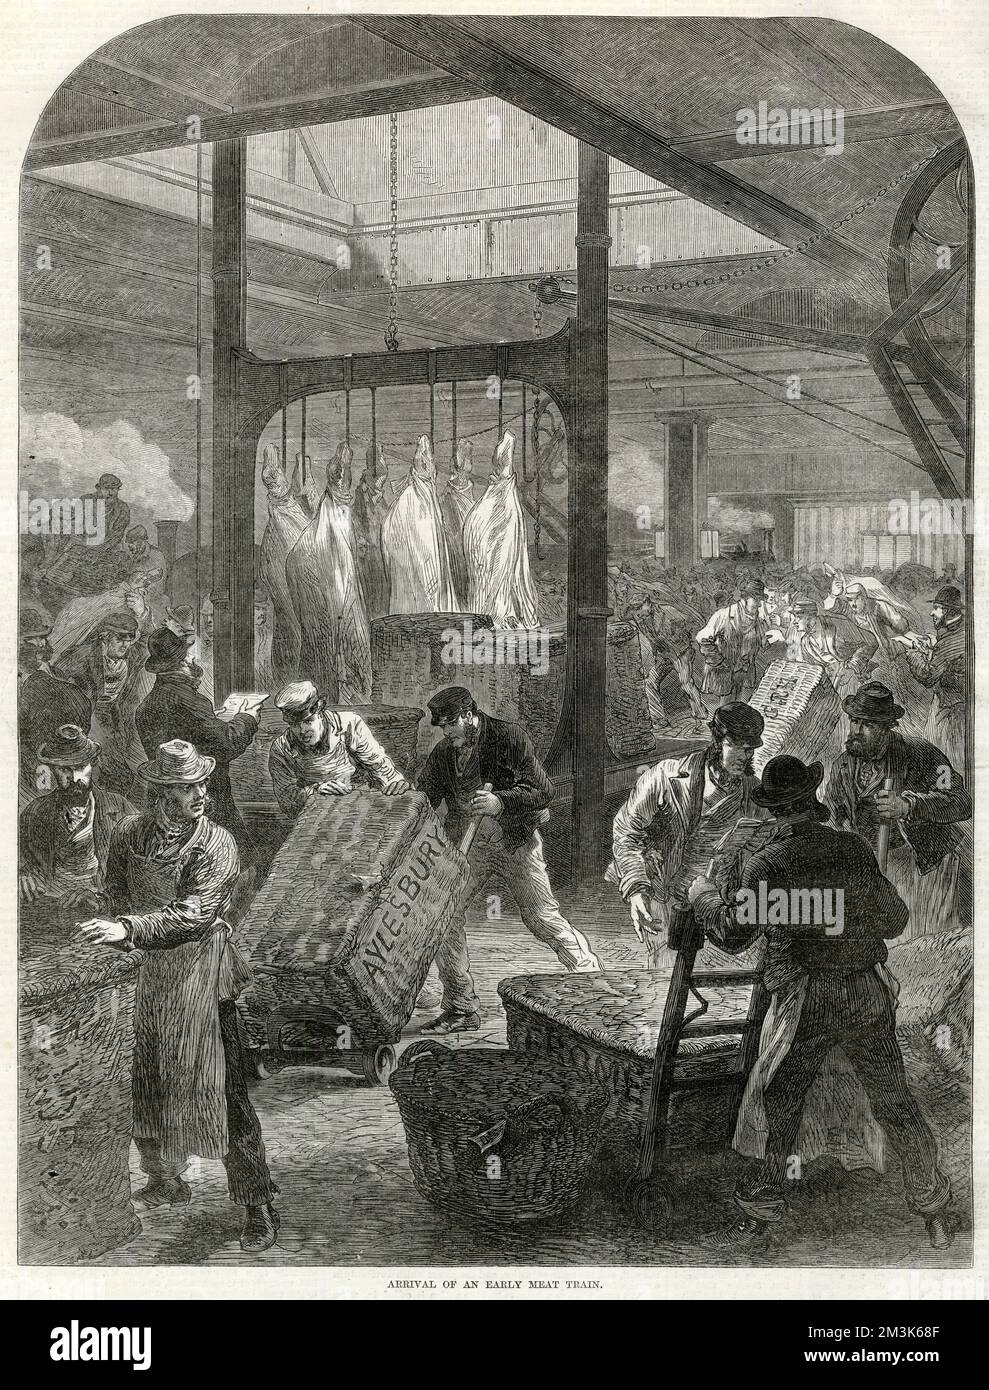 Arrival of meat at Smithfield Market, London, in 1870. The meat had just arrived by steam train (which can be seen in the background). In the centre of the image a number of sides of meat can be seen, hanging from hooks. In the foreground a large number of market porters move baskets of meat around.  1870 Stock Photo